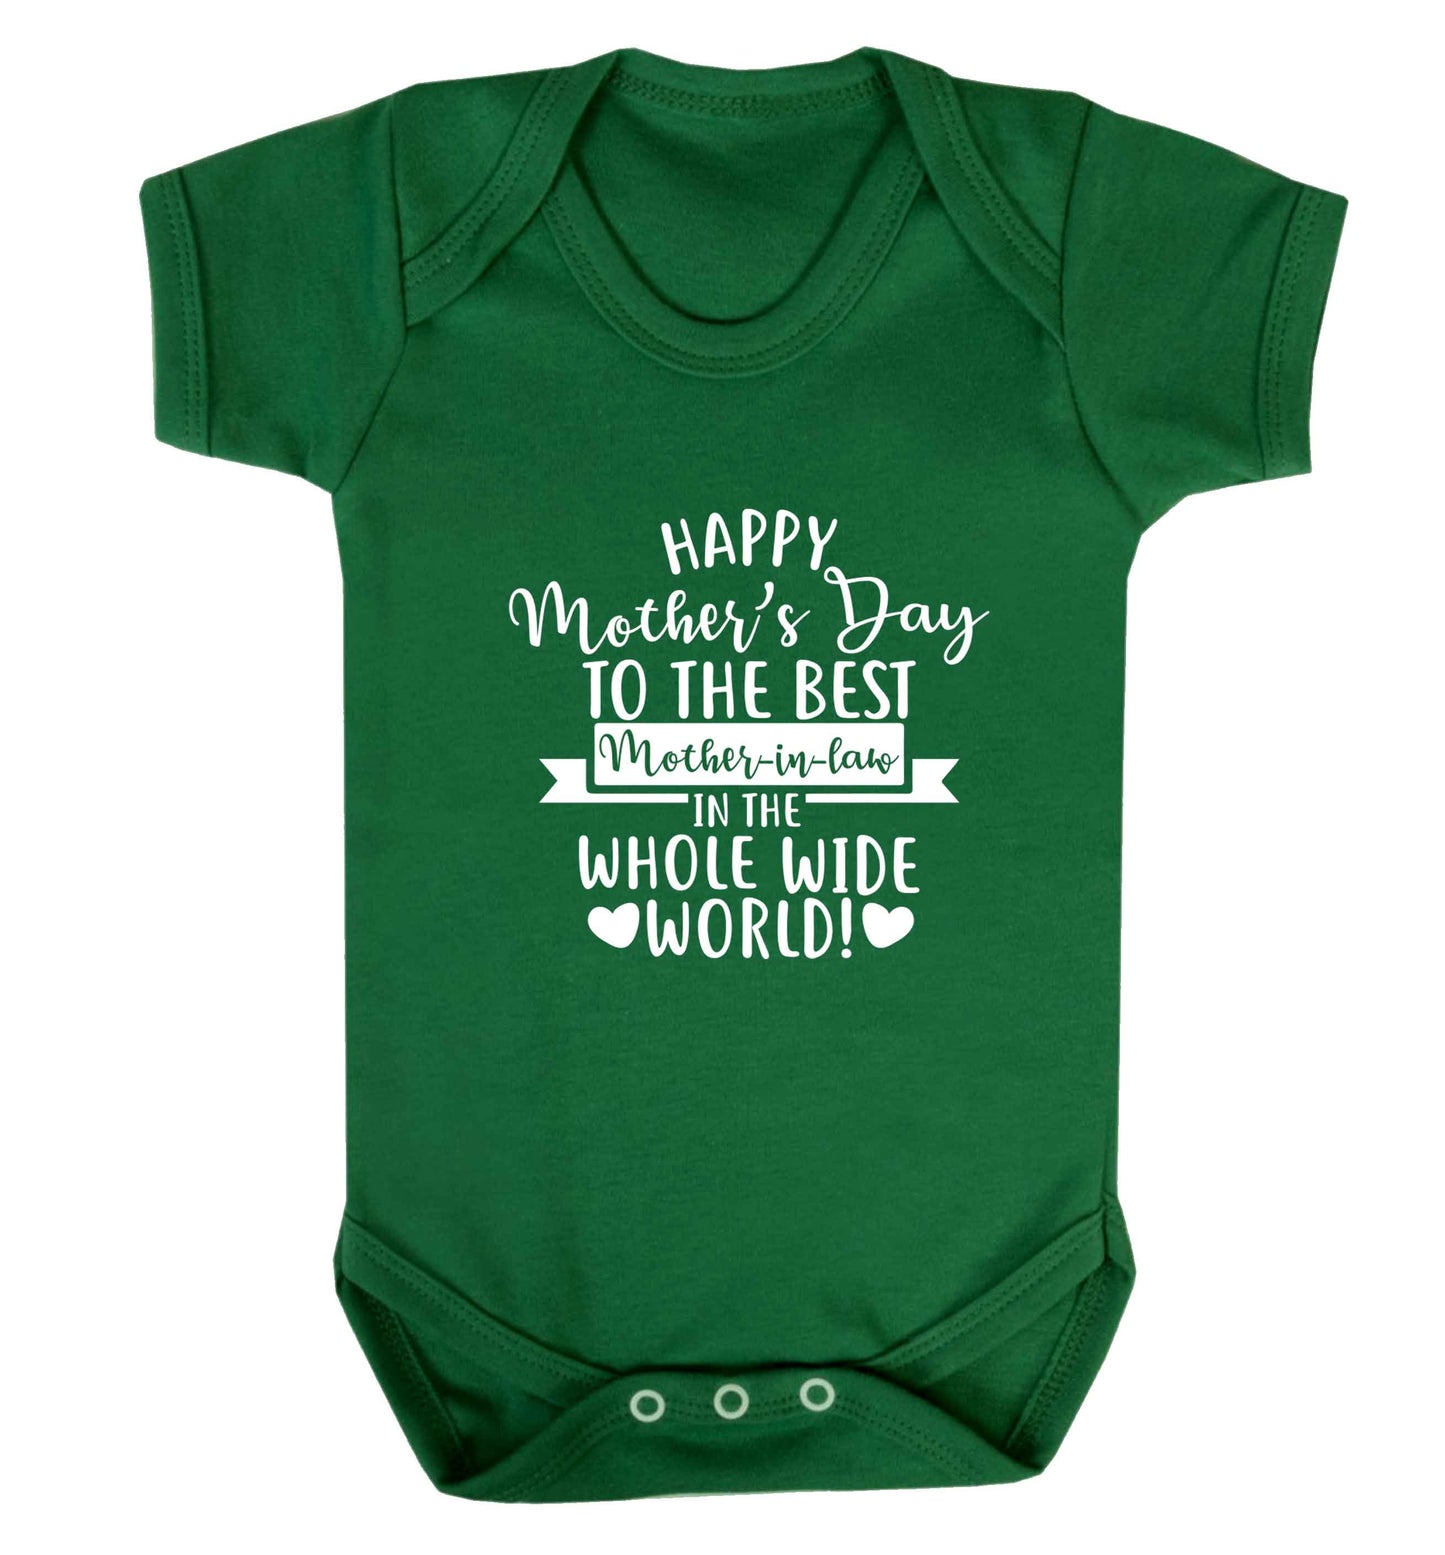 Happy mother's day to the best mother-in law in the world baby vest green 18-24 months